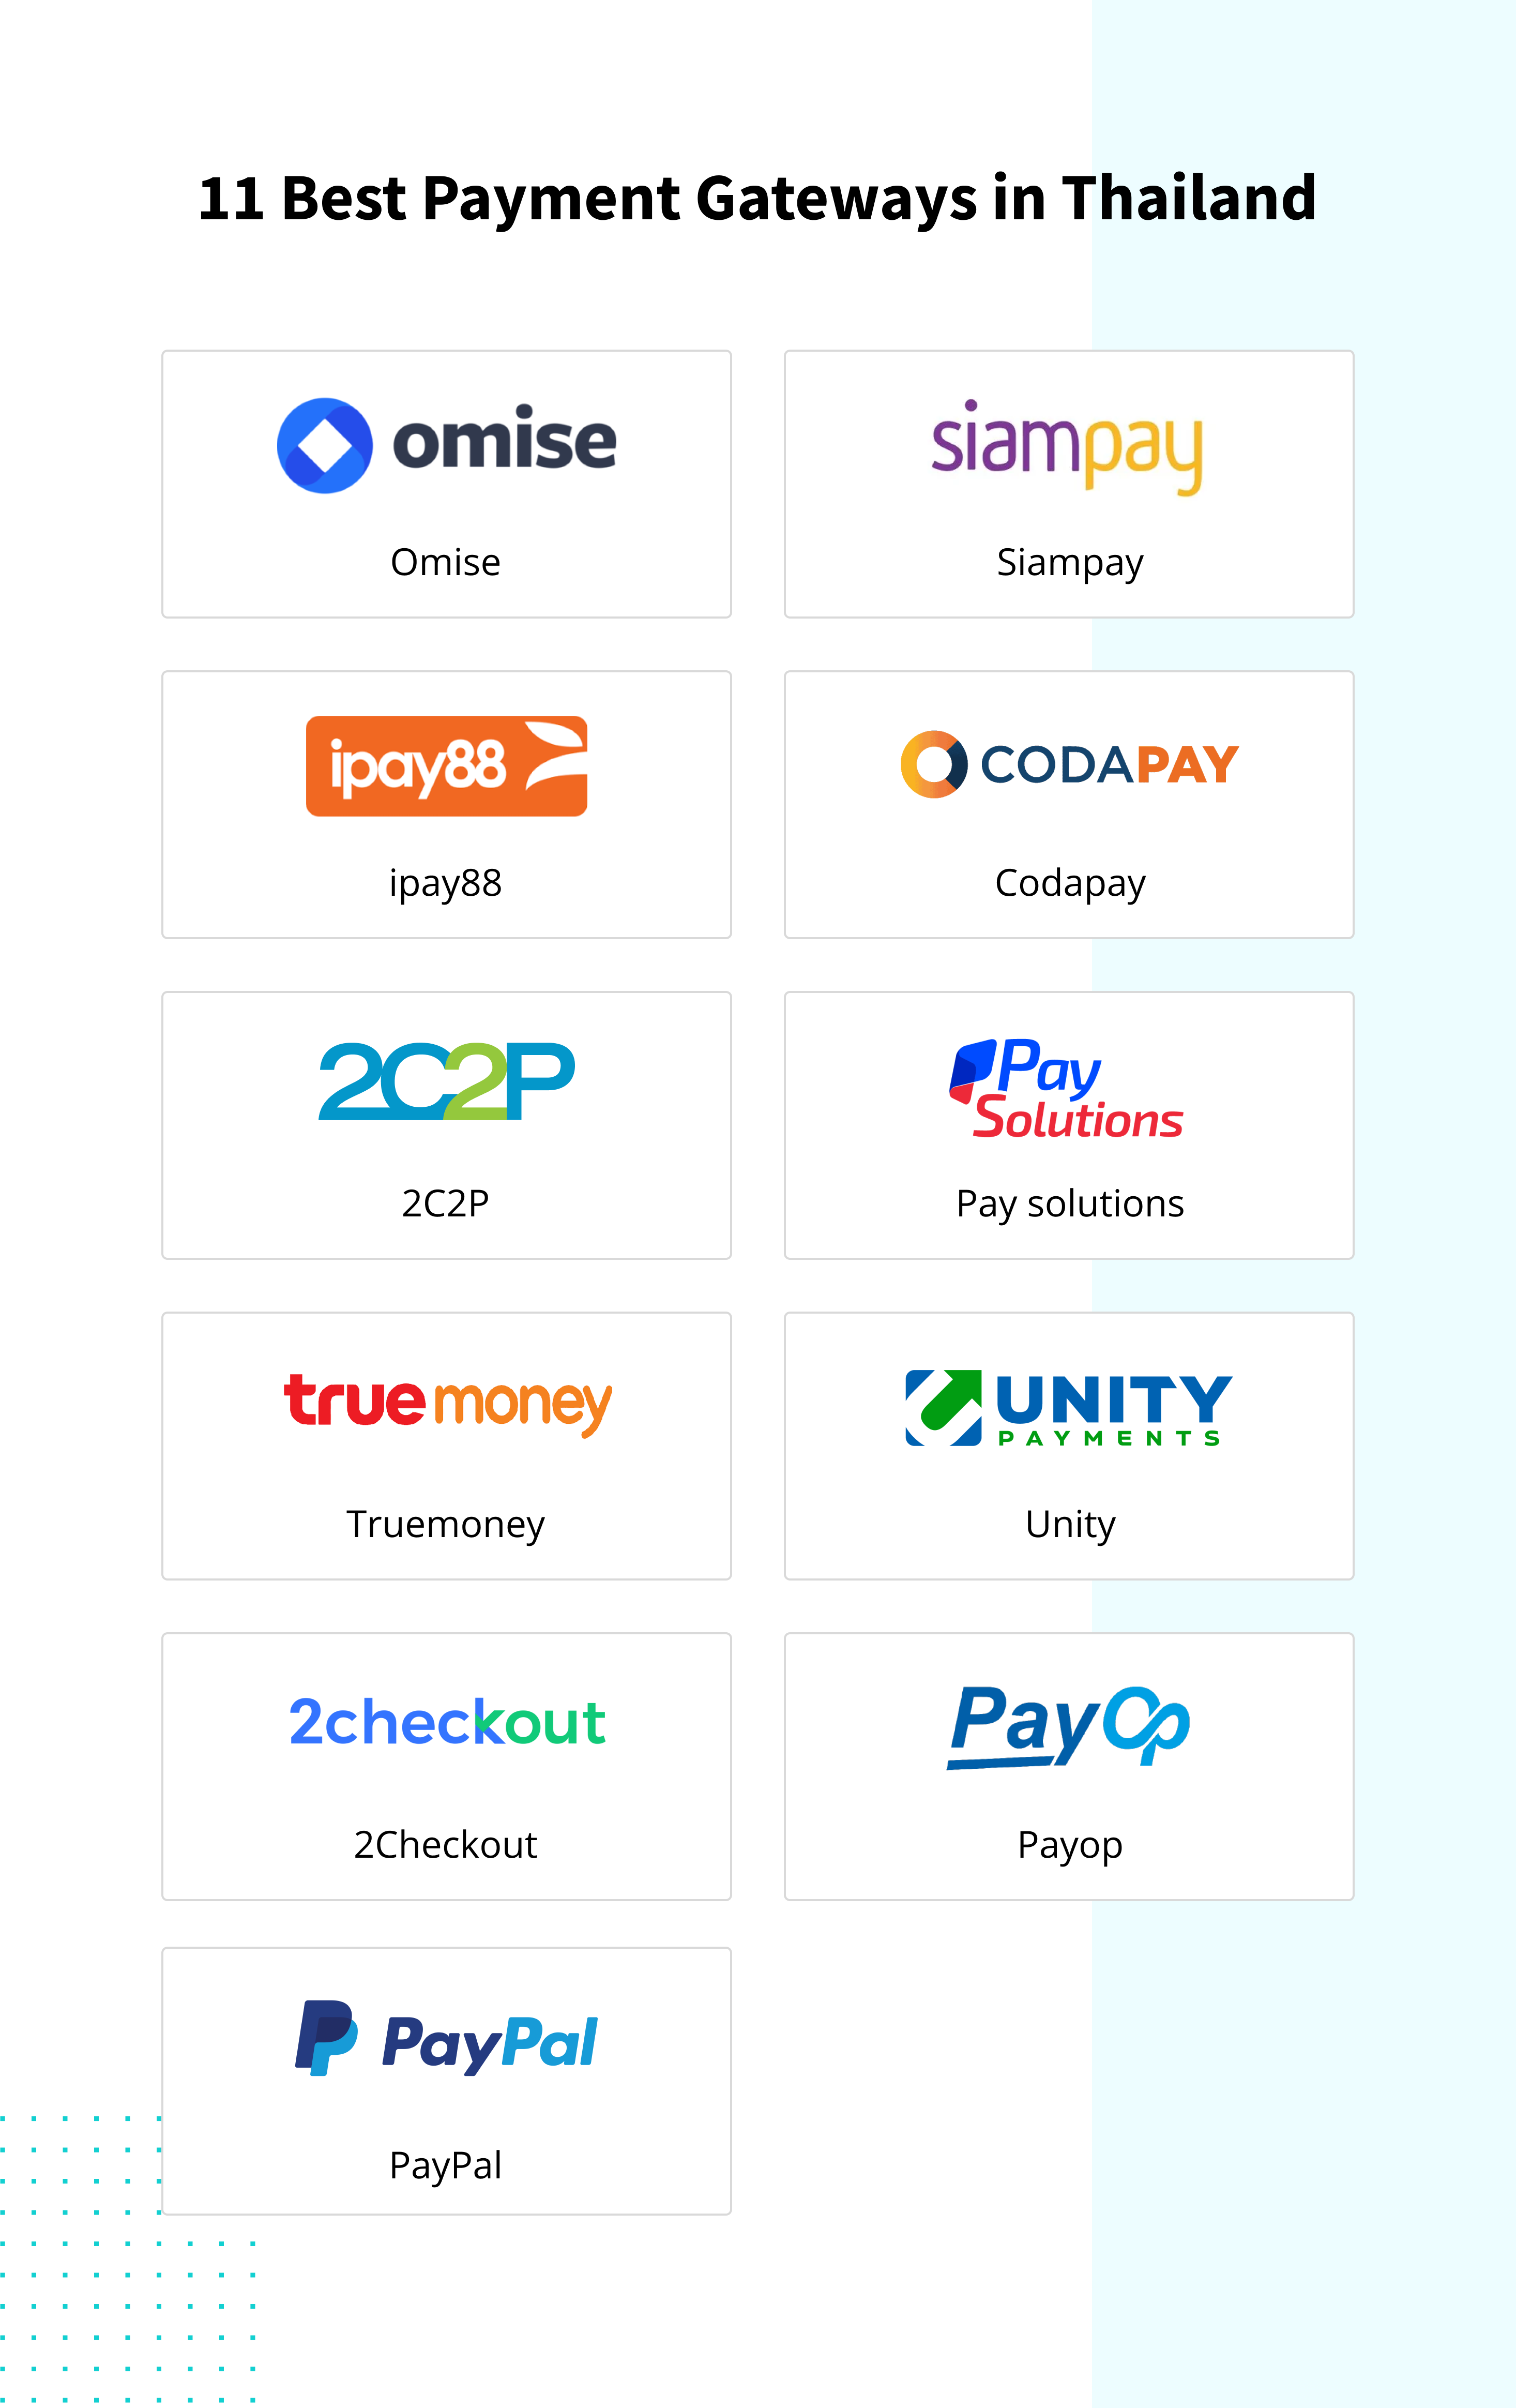 All About the 11 Best Payment Gateways in Thailand